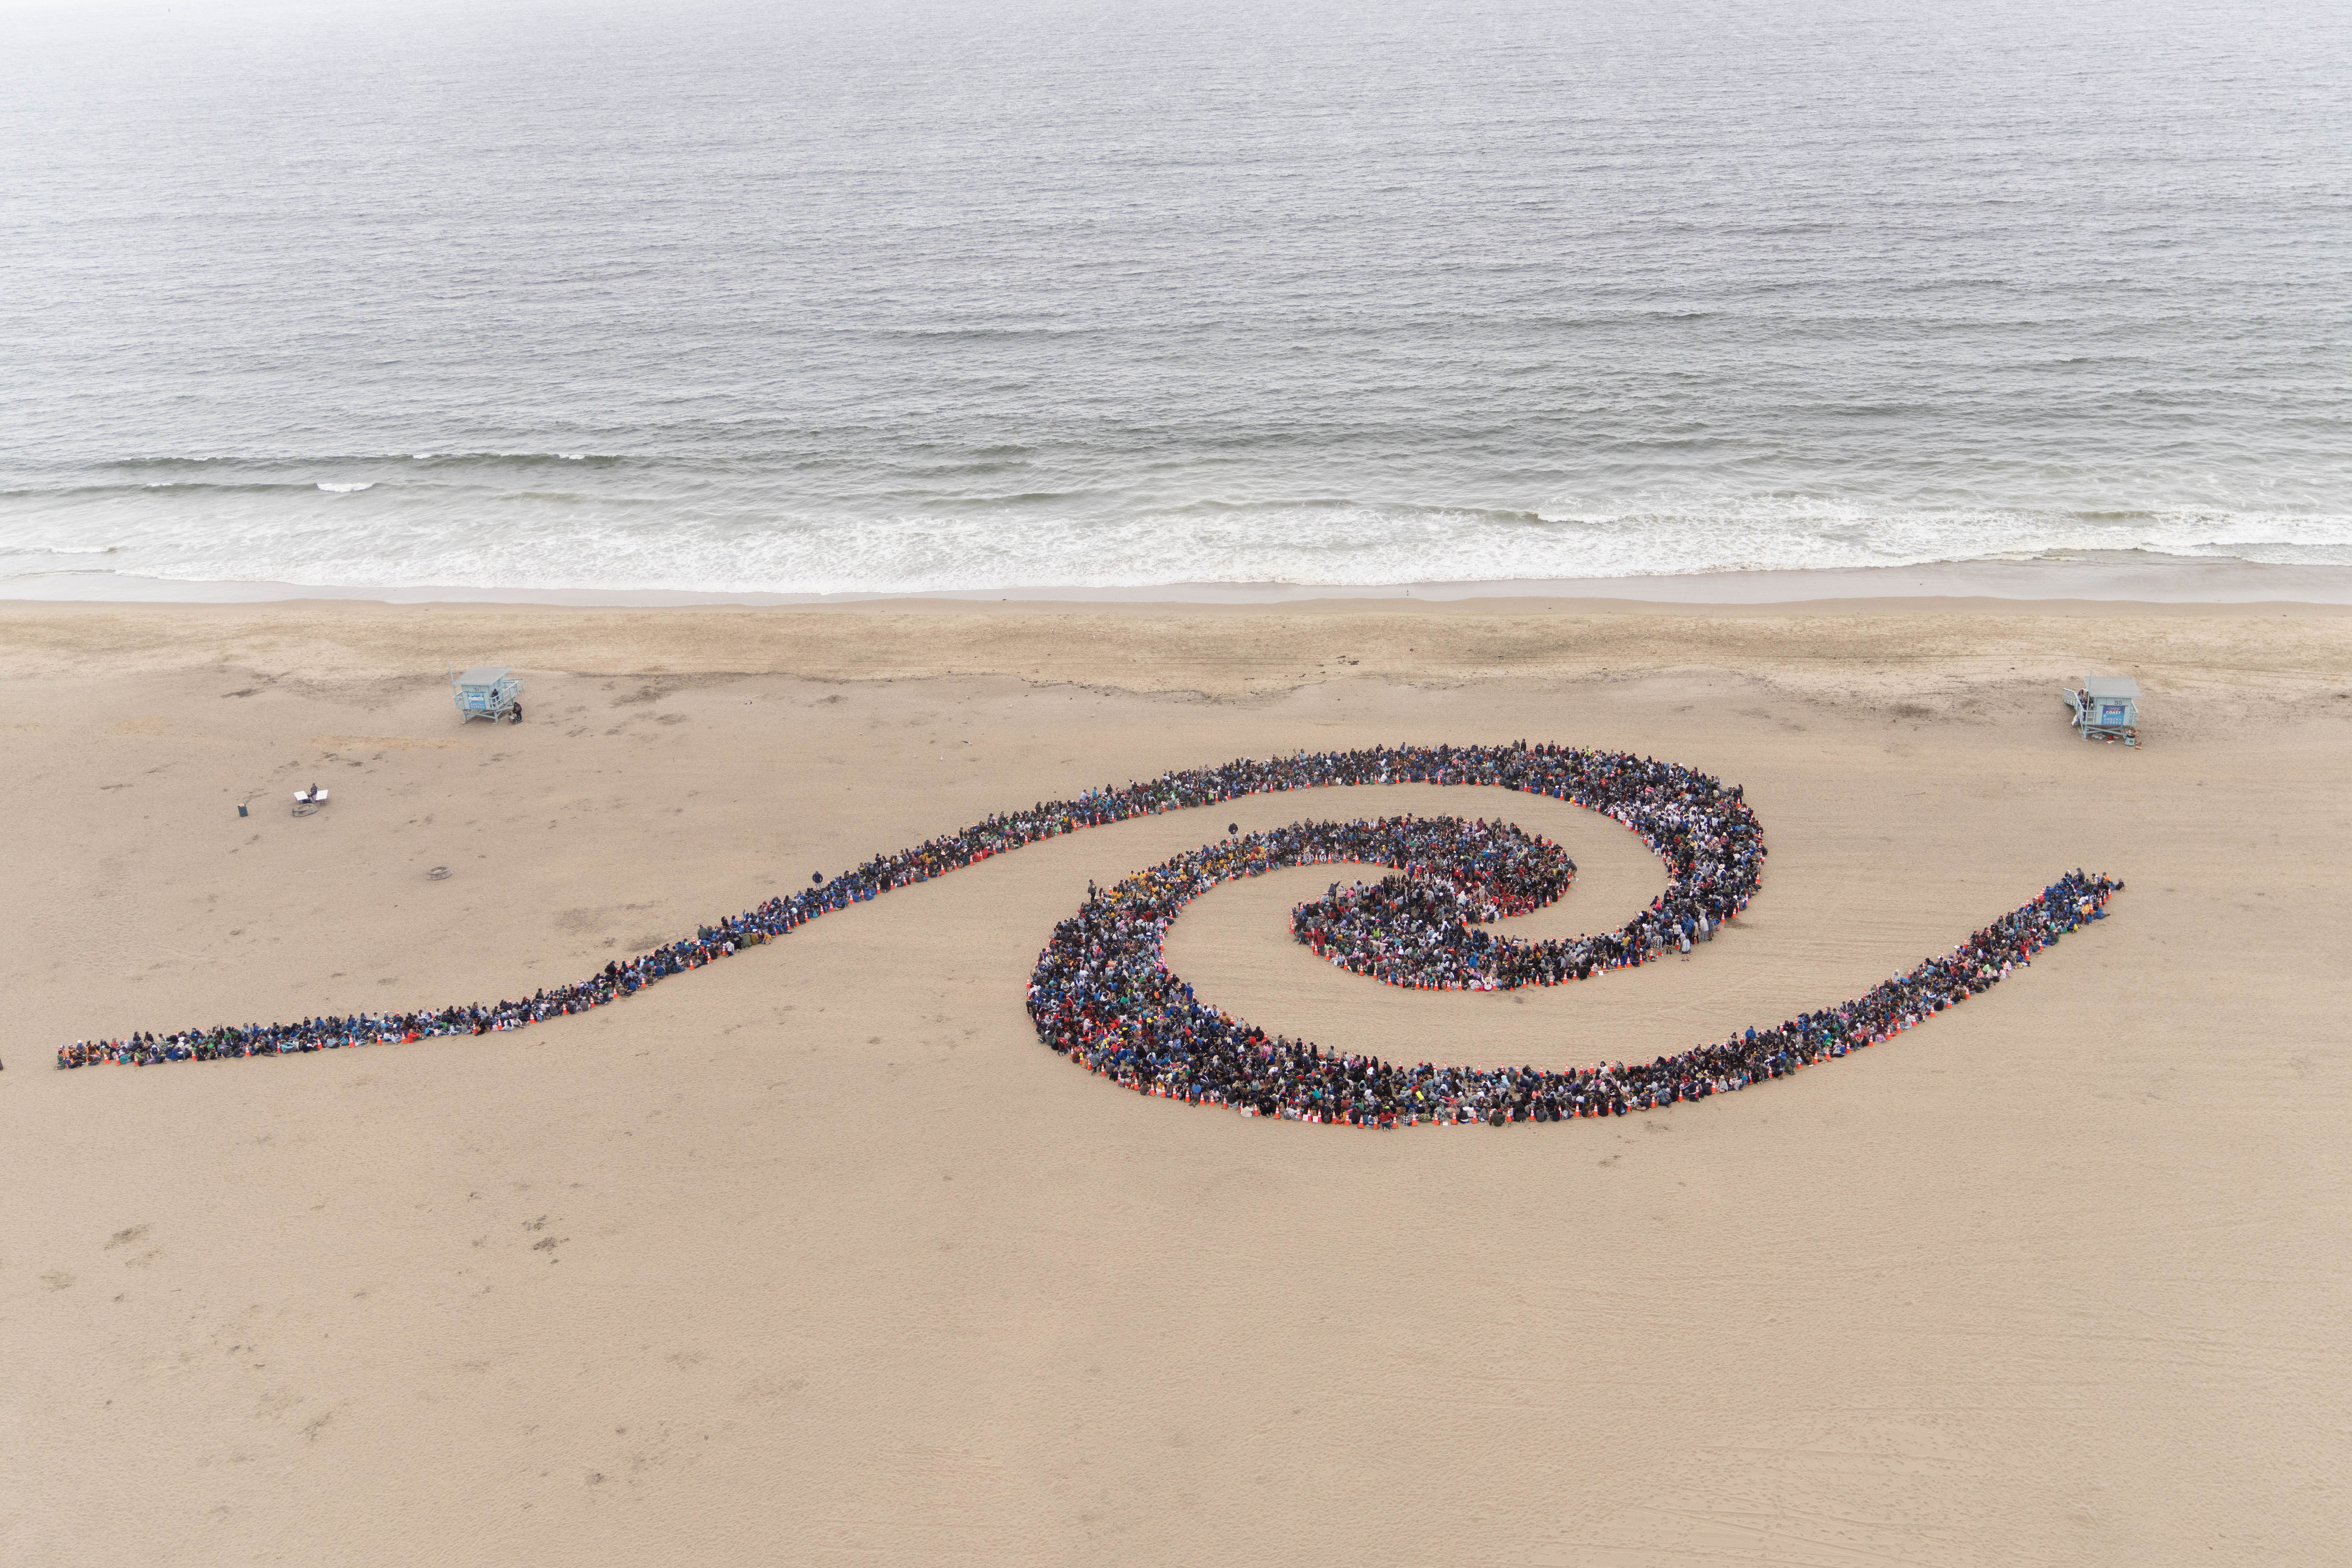 4,000 L.A. Students Celebrate the 28th Annual Kids Ocean Day